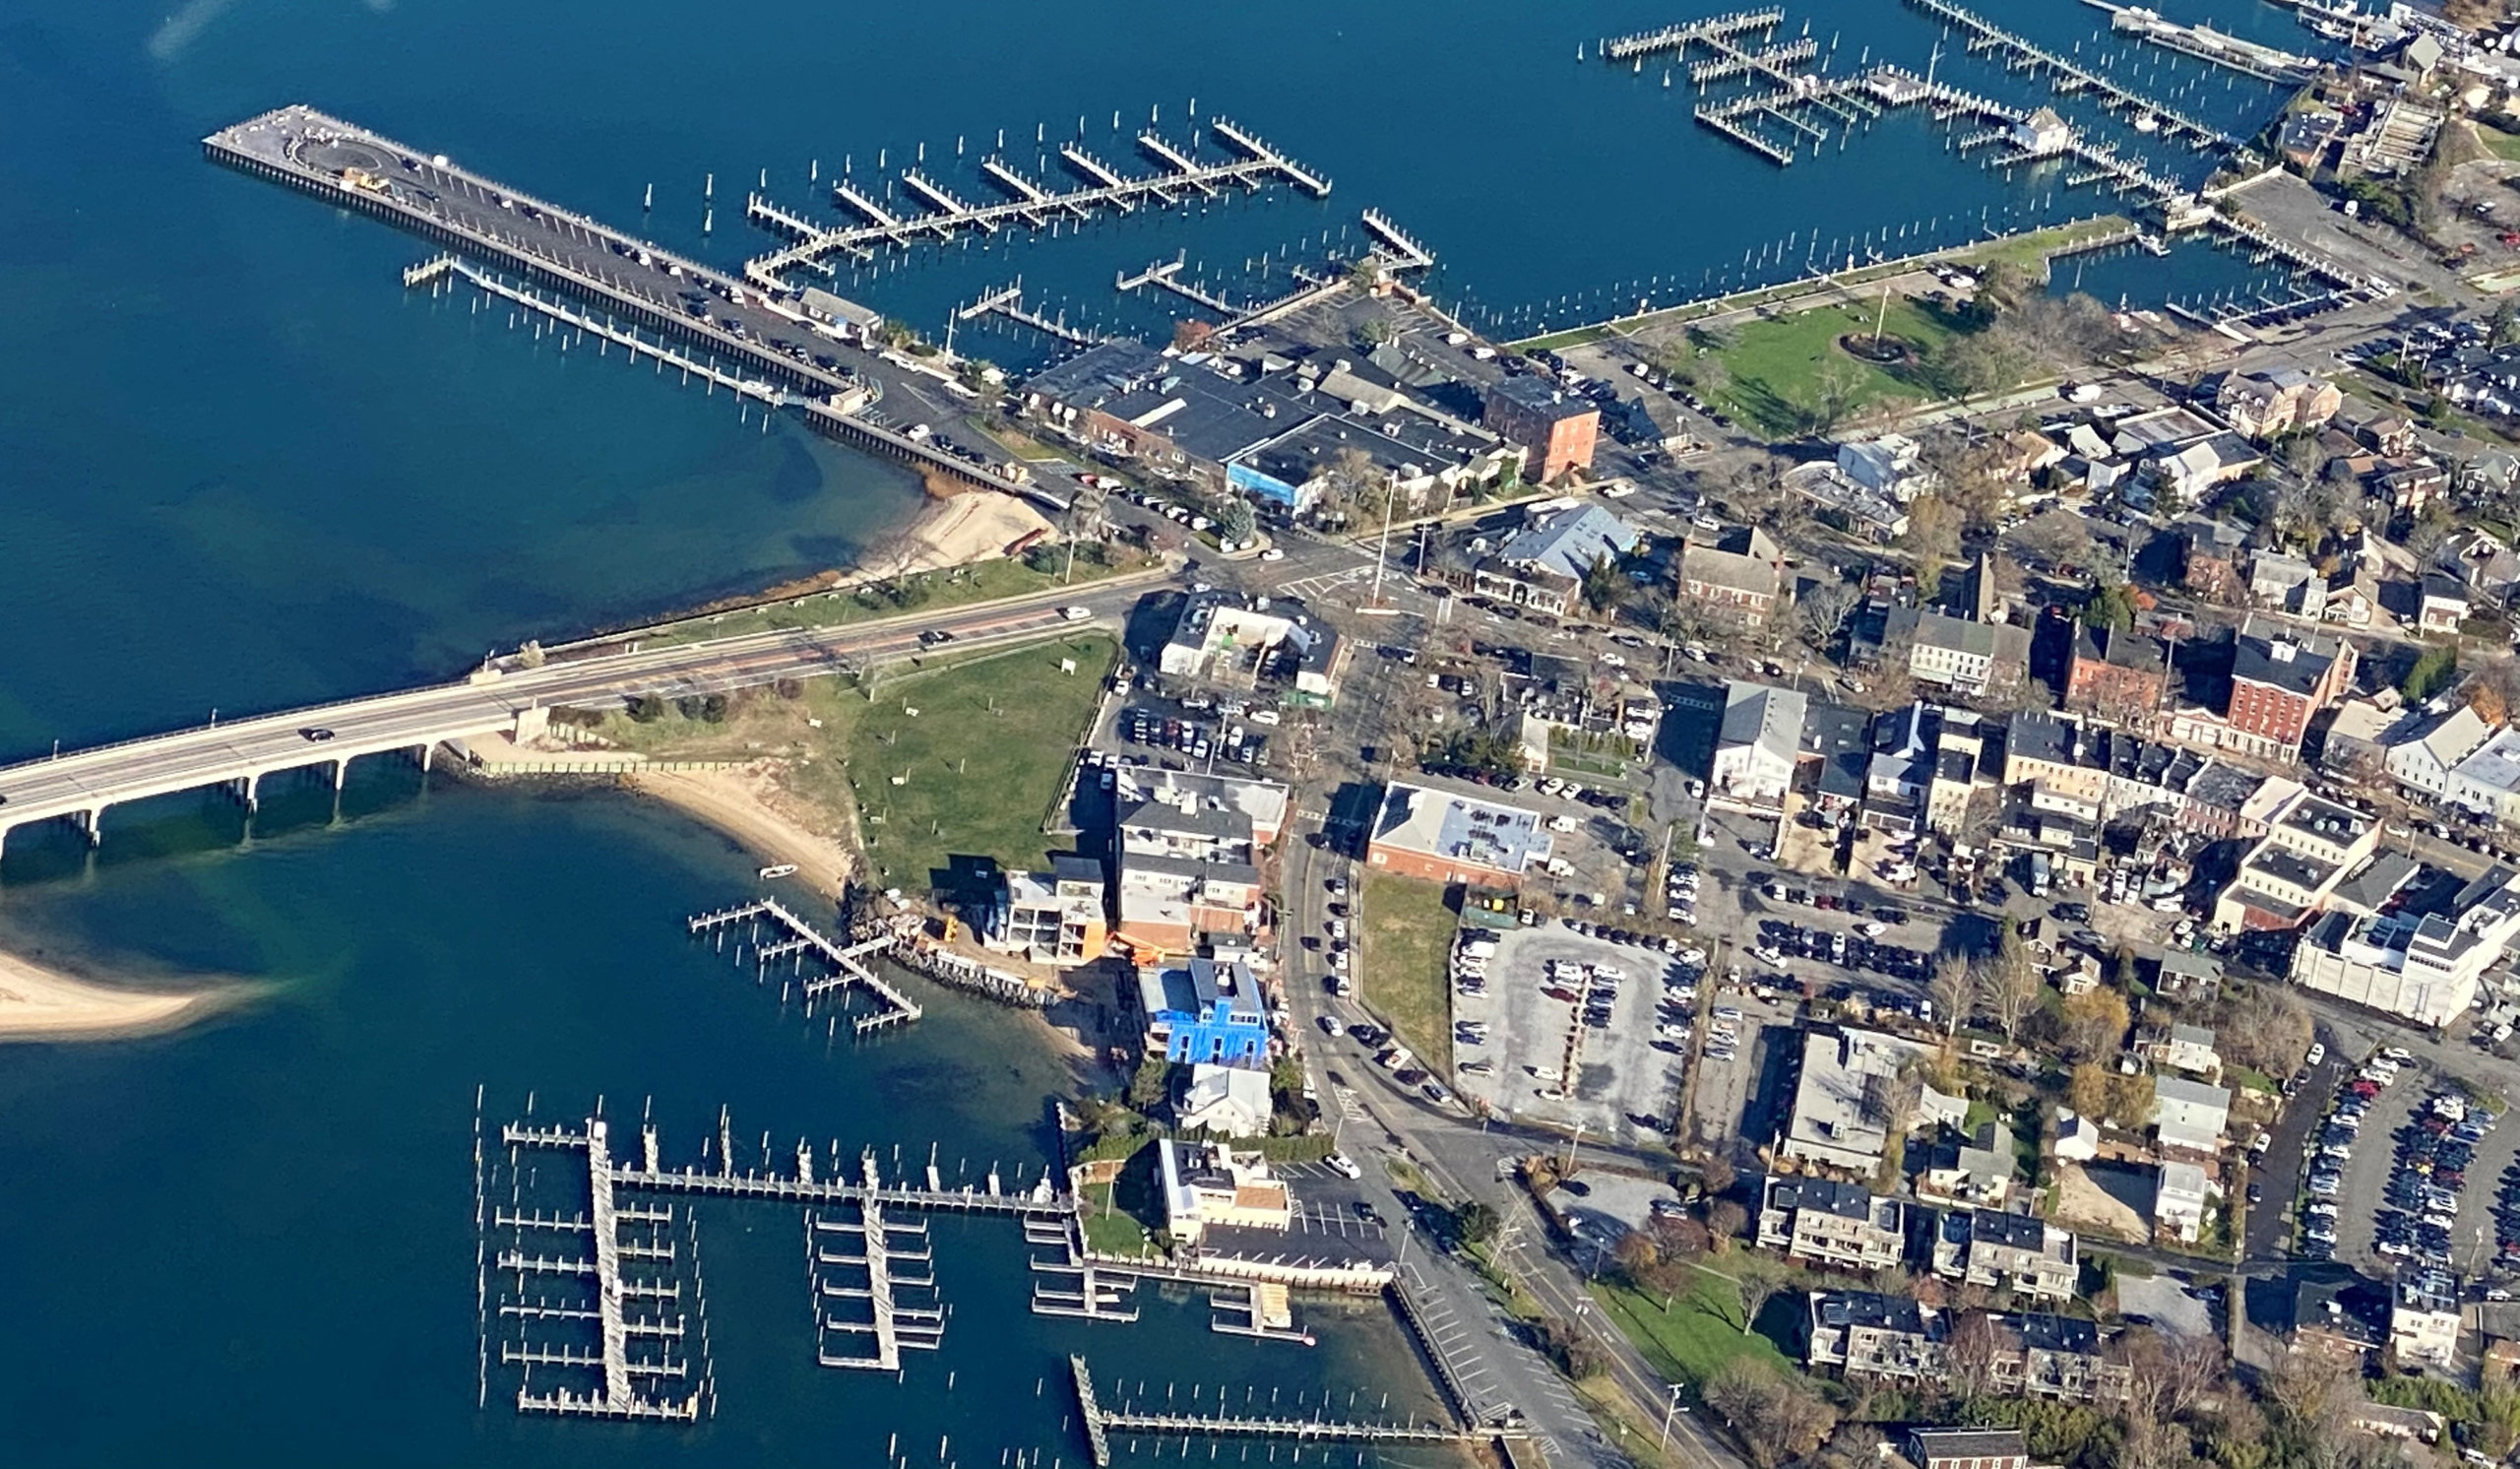 Aerial view of the Sag Harbor waterfront and village